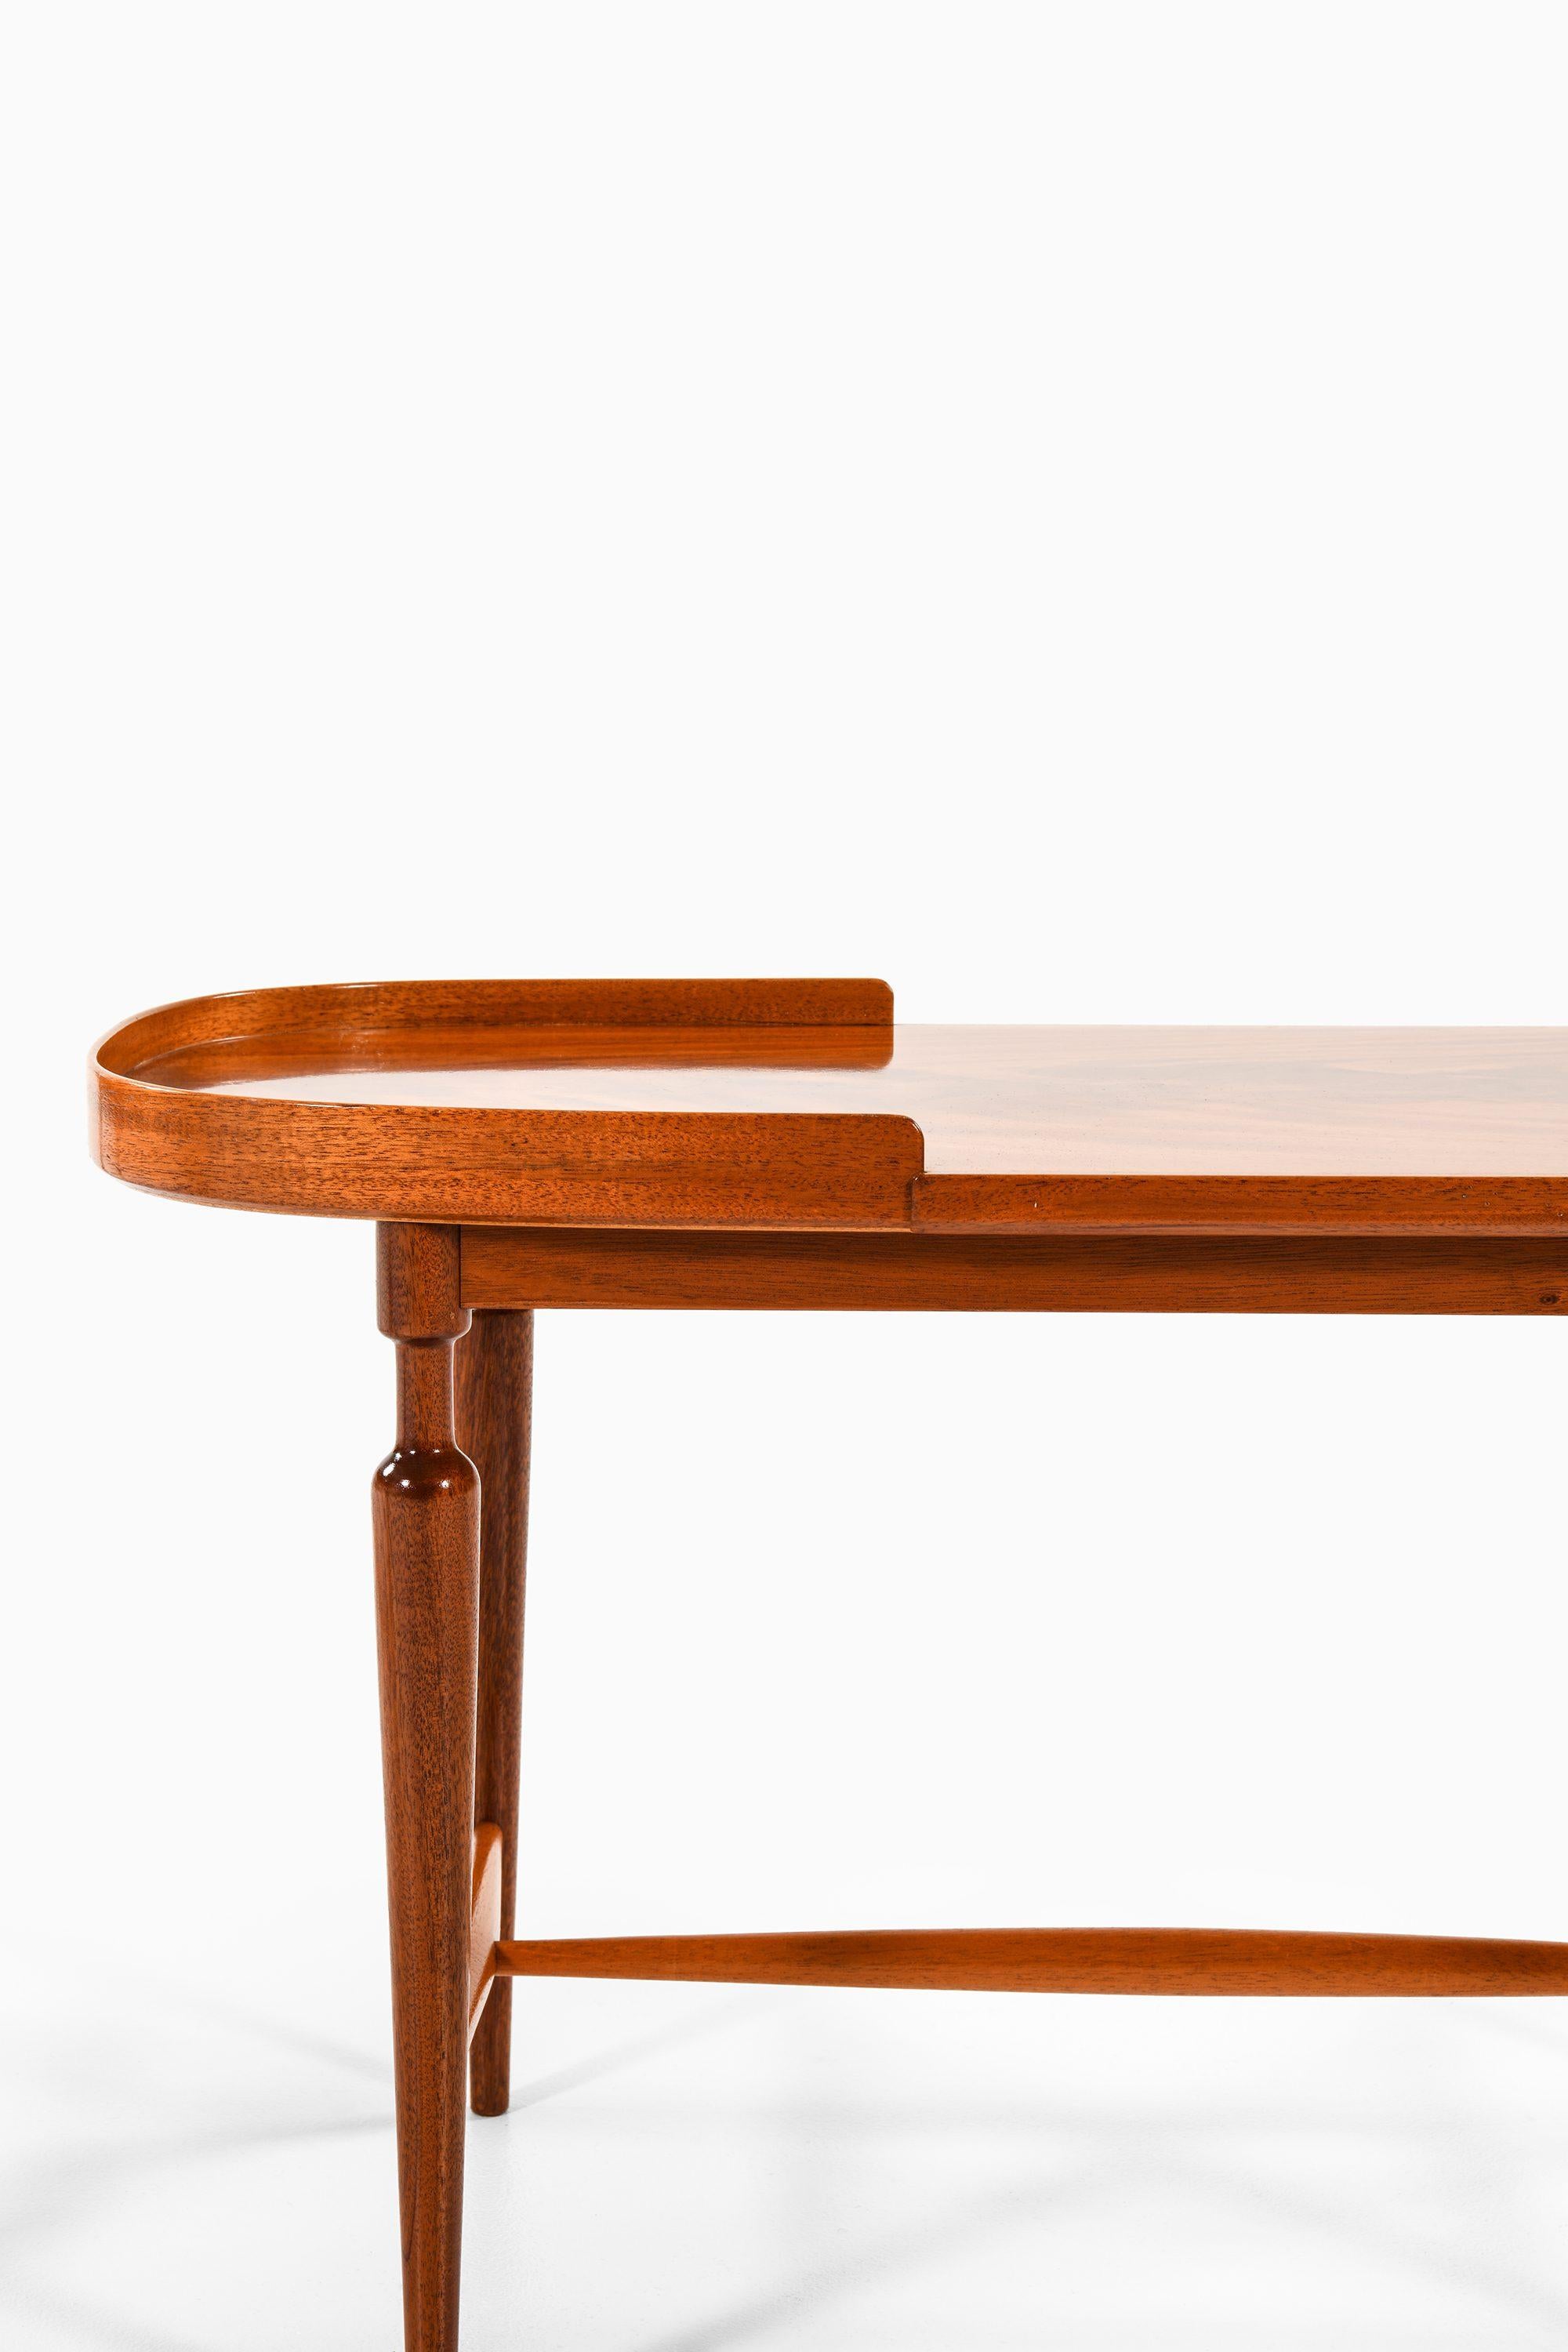 Pair of Side Table in Mahogany by Josef Frank, 1939 In Good Condition For Sale In Limhamn, Skåne län